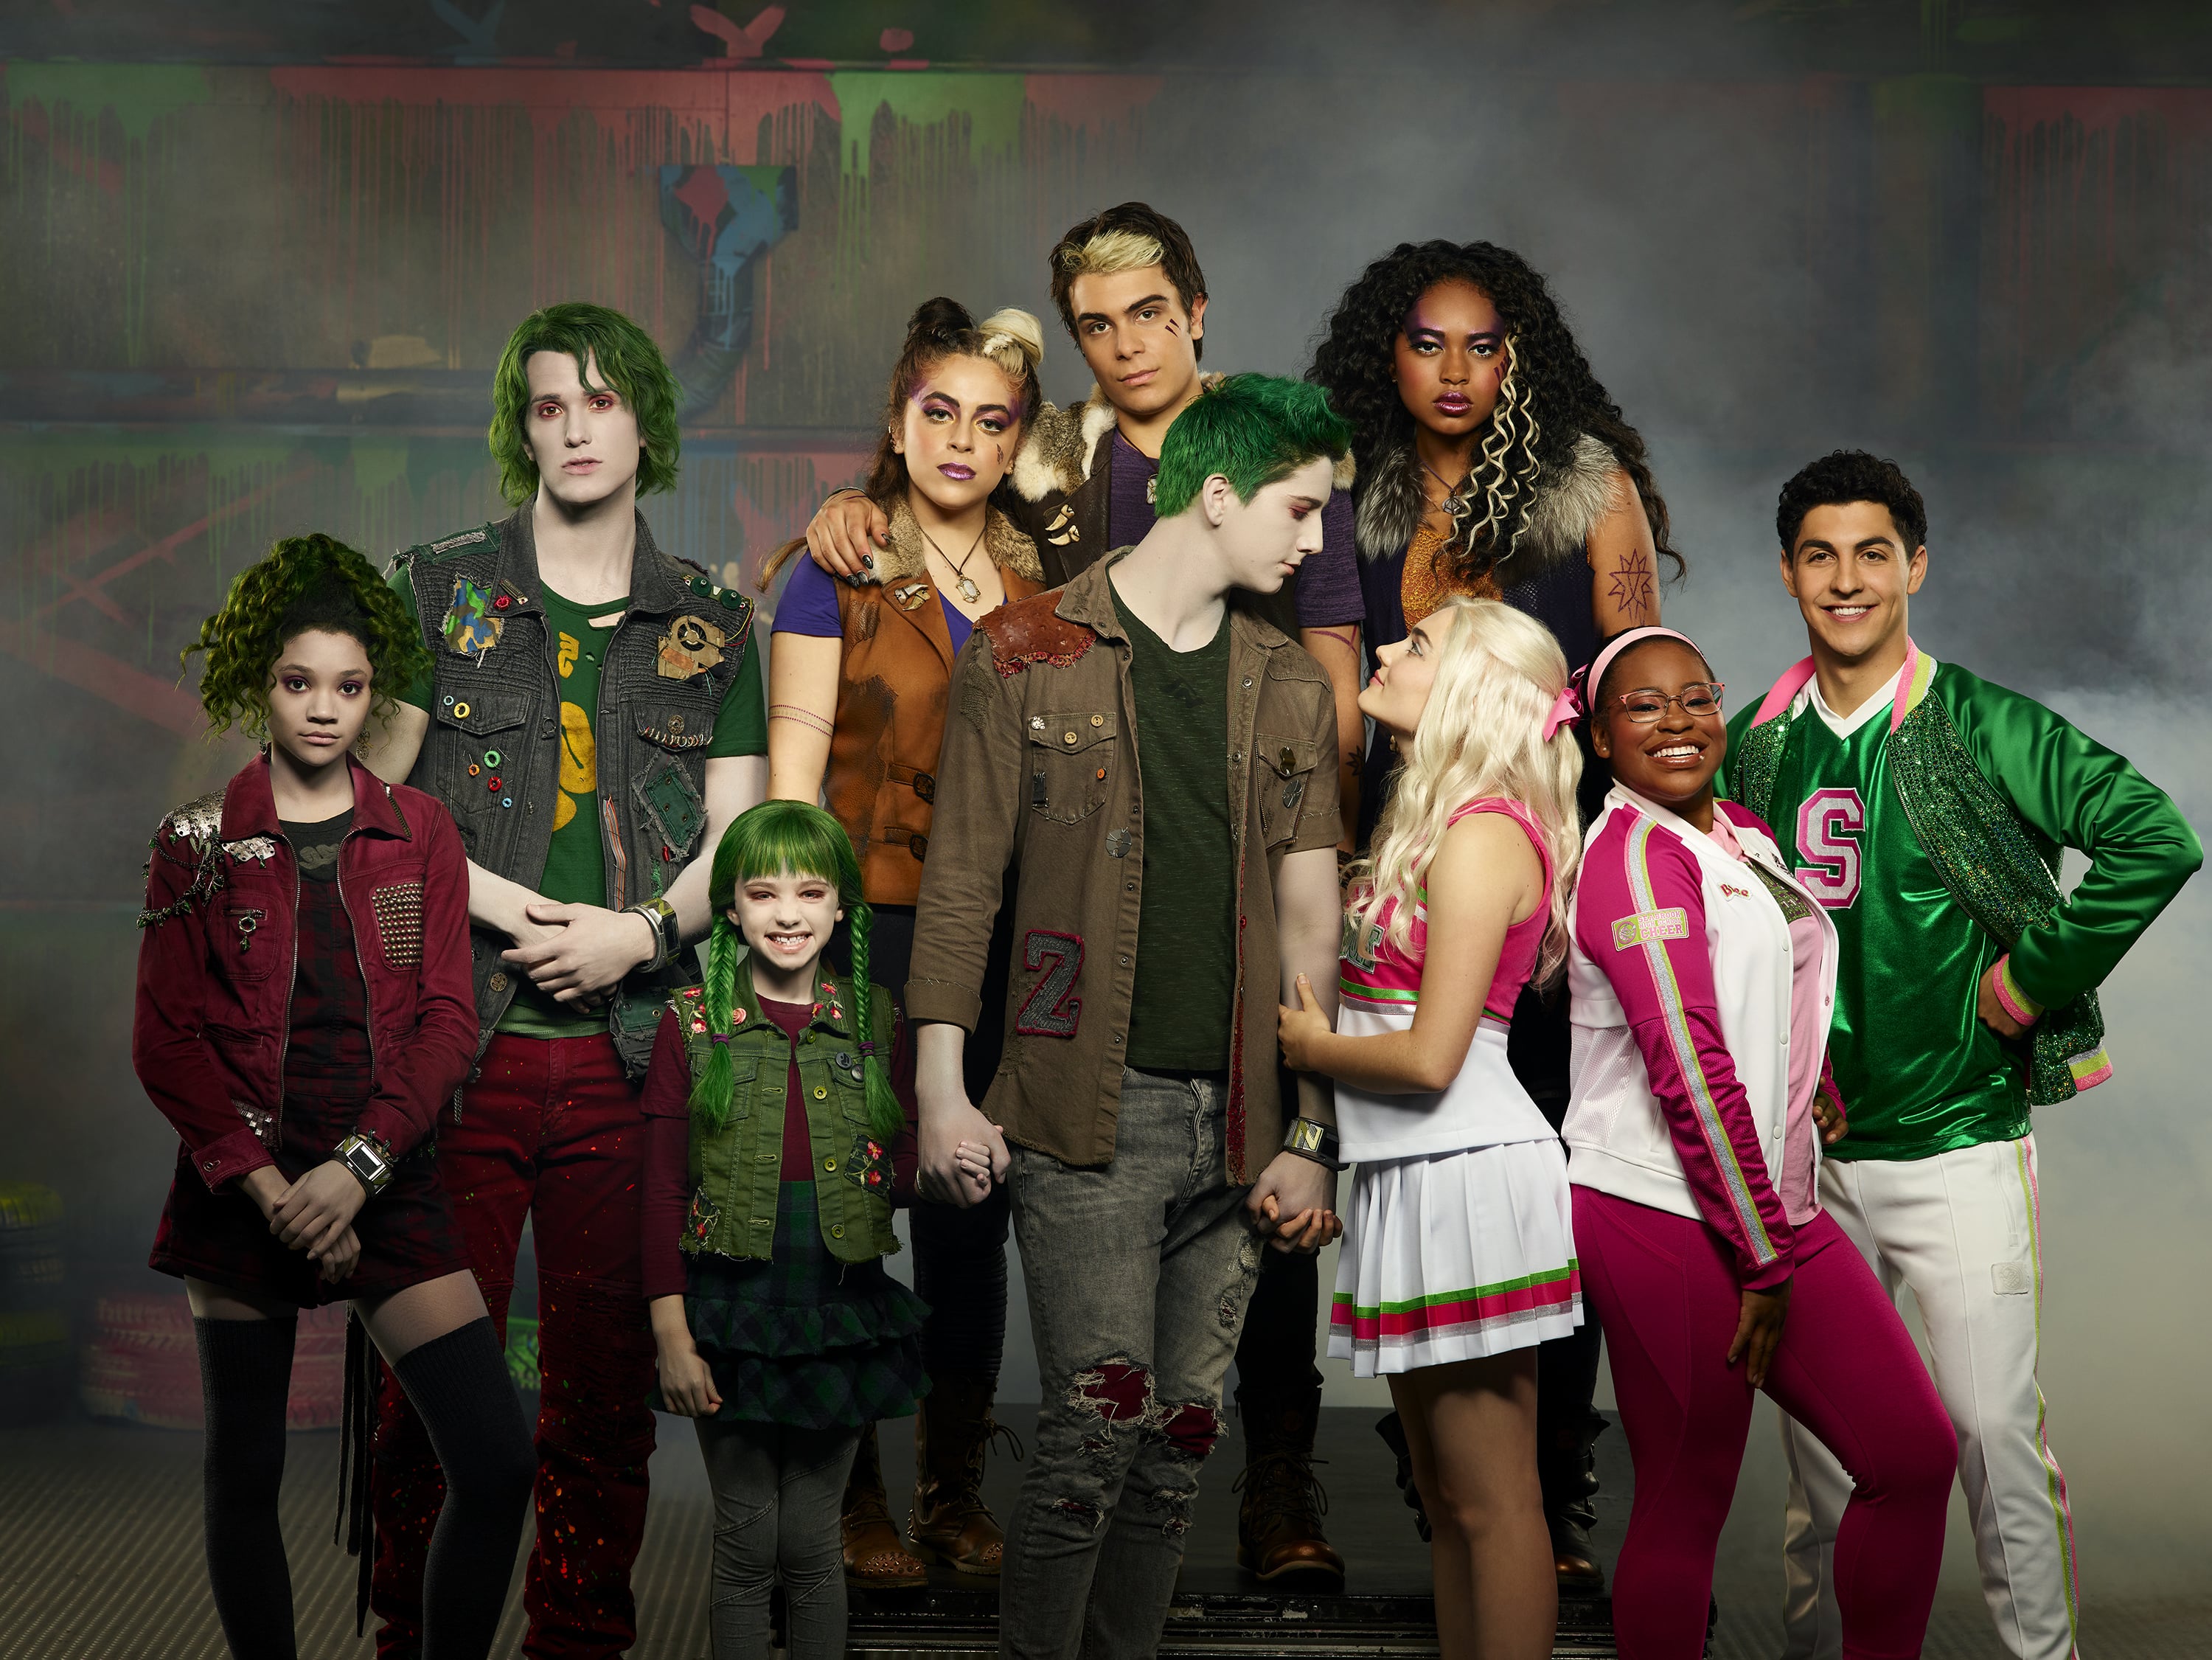 Disney Channel's 'Zombies' arrives with hope that zombies and